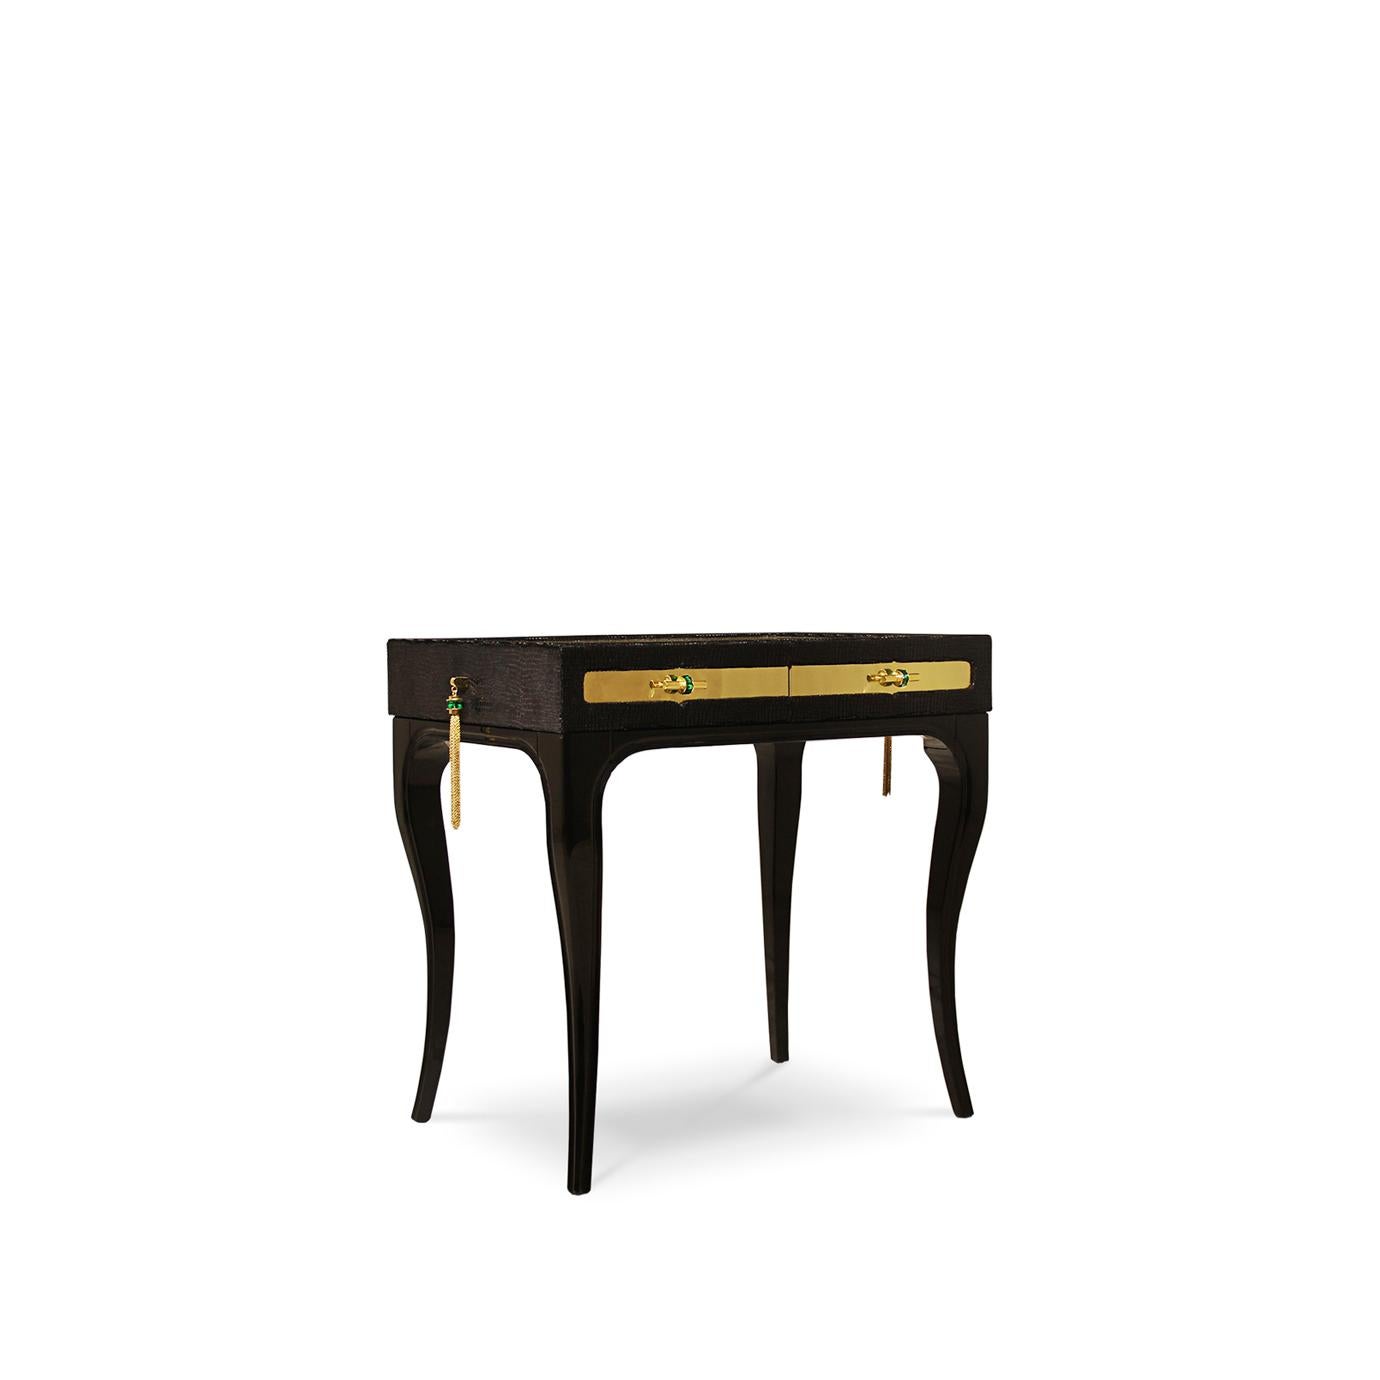 Exuding feelings of fantasy, this highly coveted nightstand is bold, daring and seductive. Her wooden frame is cloaked in an exotic fabric with a complementing metal top, juxtaposed with the mesmerizing movements of shimmering glass tassels.